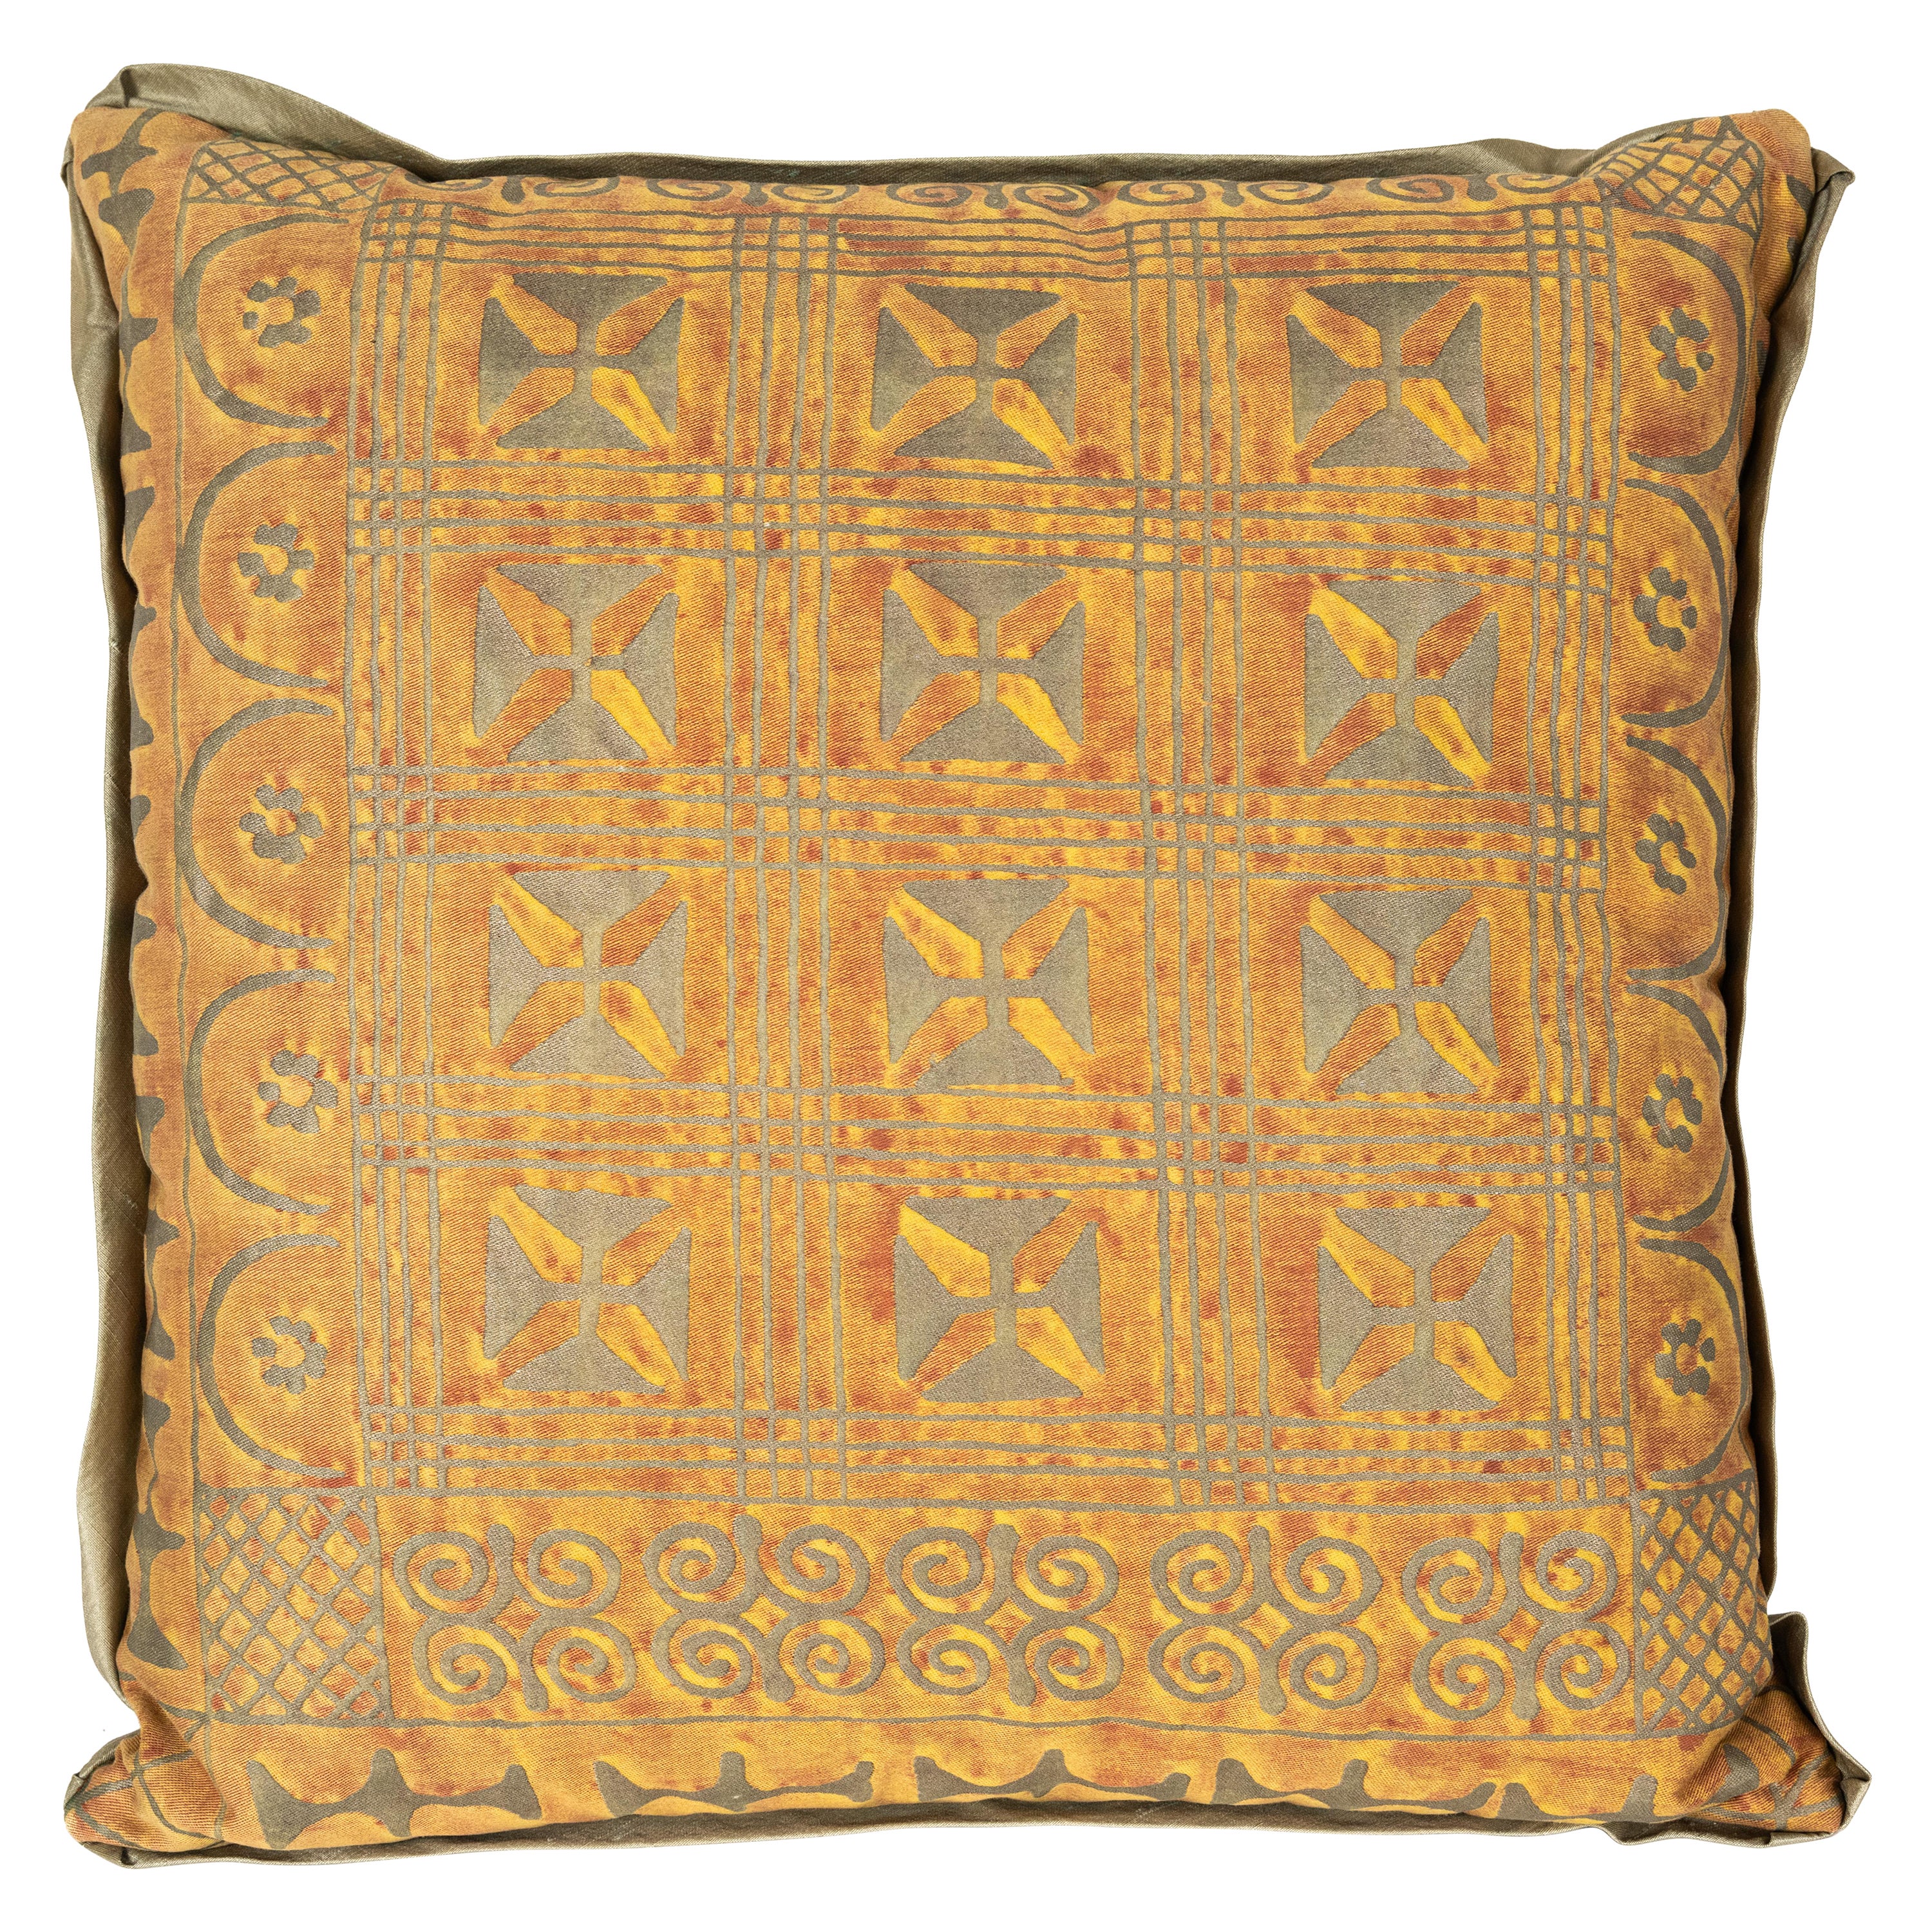 A Small Fortuny Fabric Cushion in the Ashanti Pattern